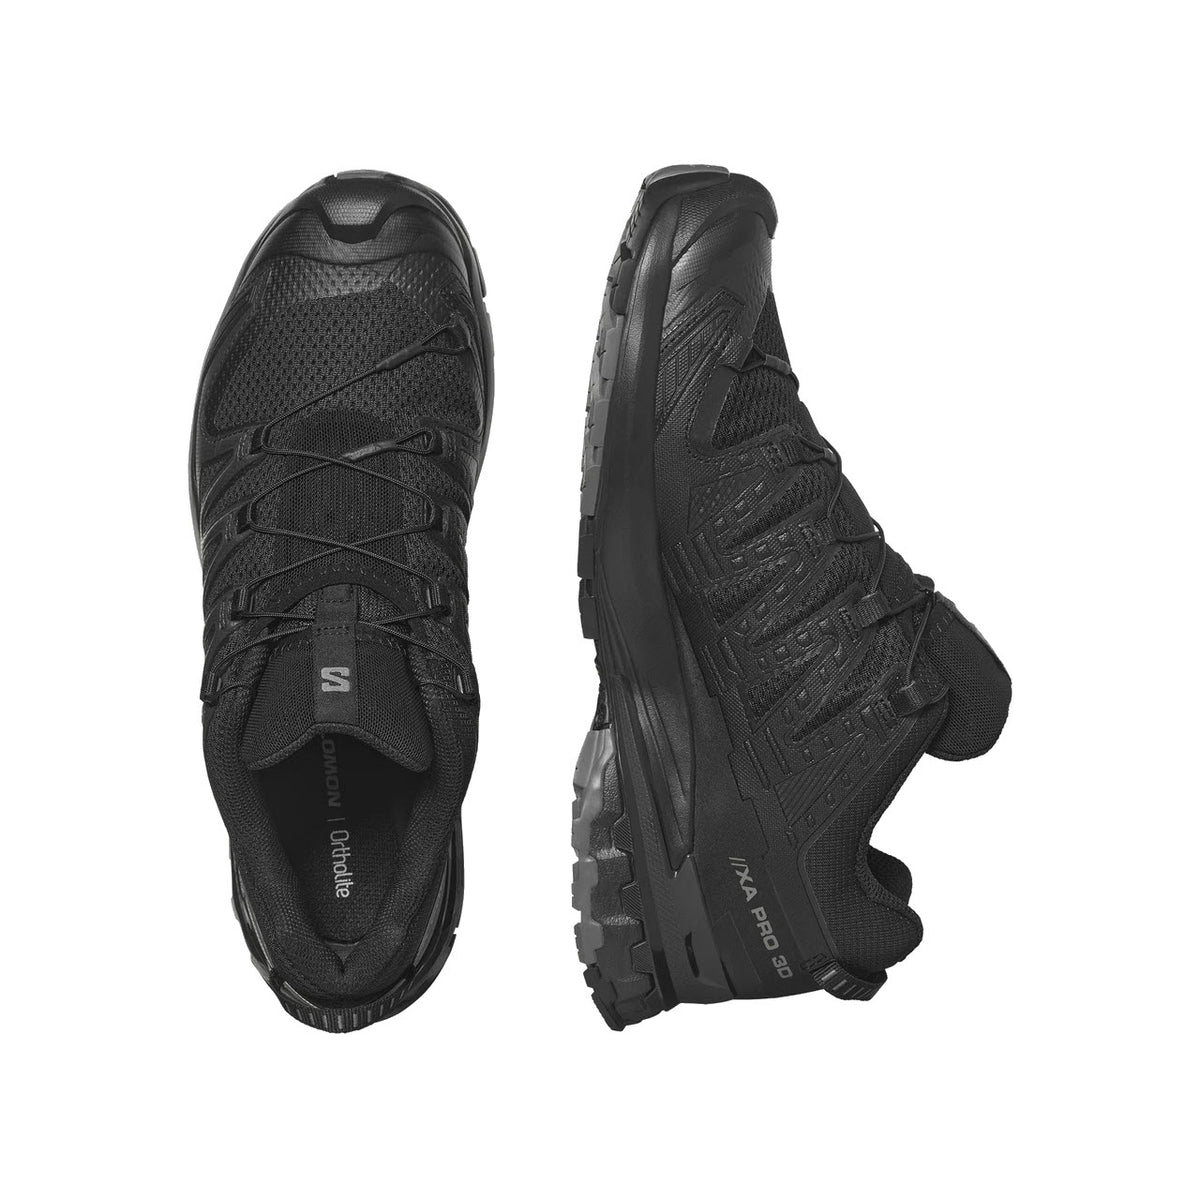 A pair of black Salomon XA PRO 3D V9 trail running shoes viewed from above, highlighting their rugged Contagrip soles and secure lacing system.